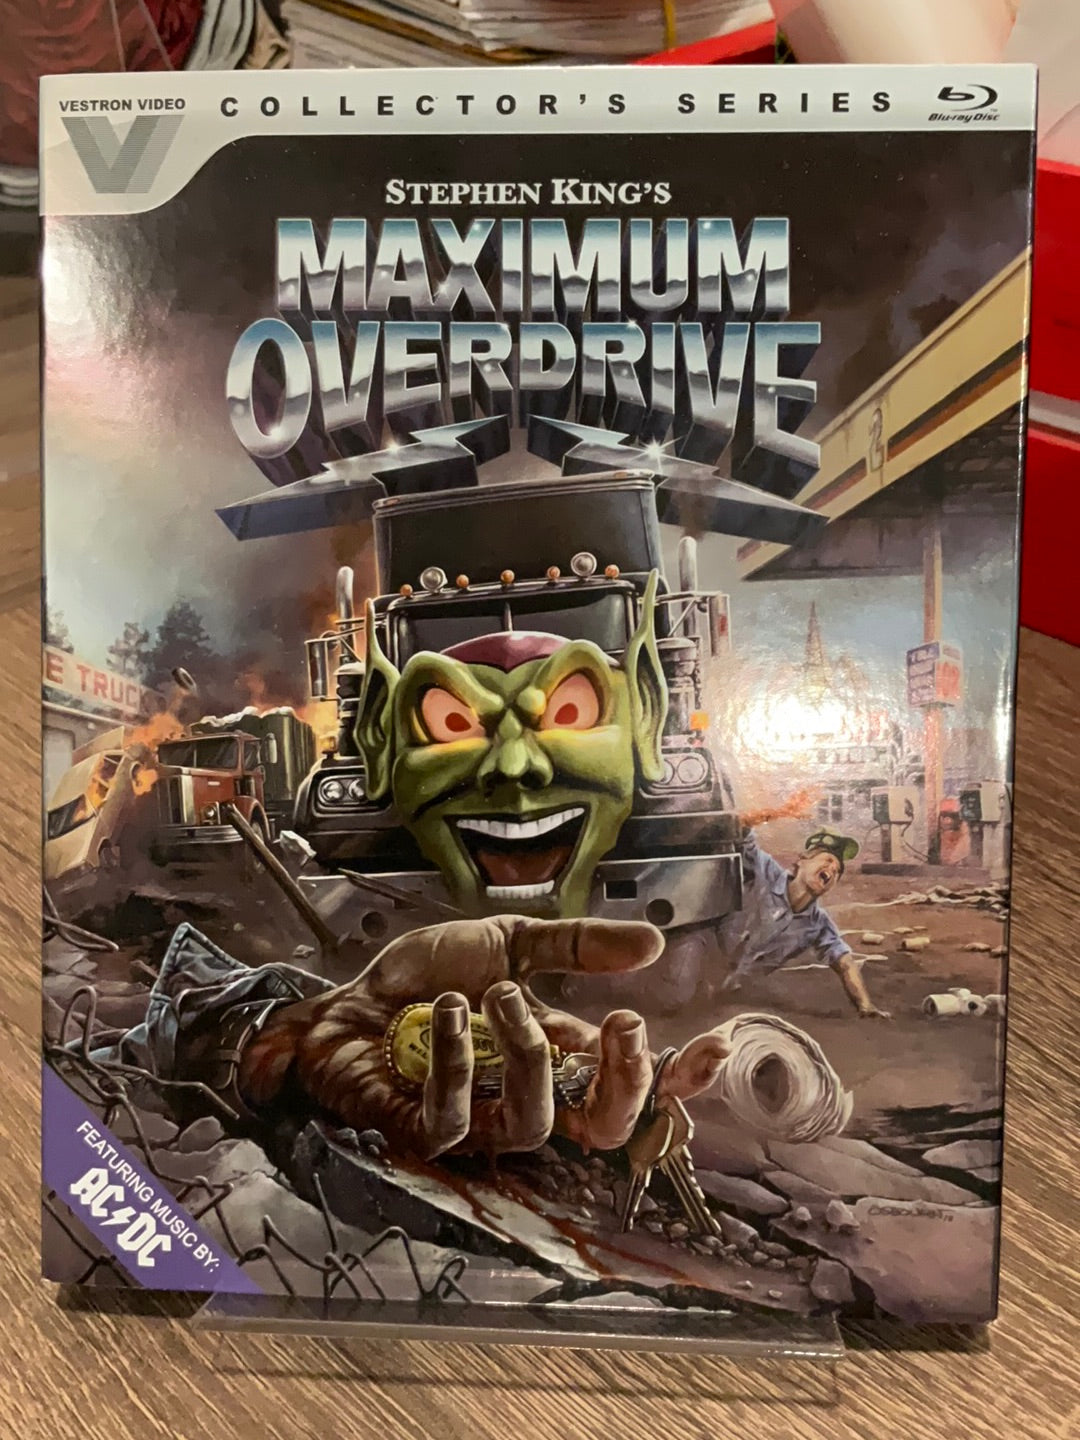 Maximum Overdrive (Vestron Video Collector's Series) (Blu-ray